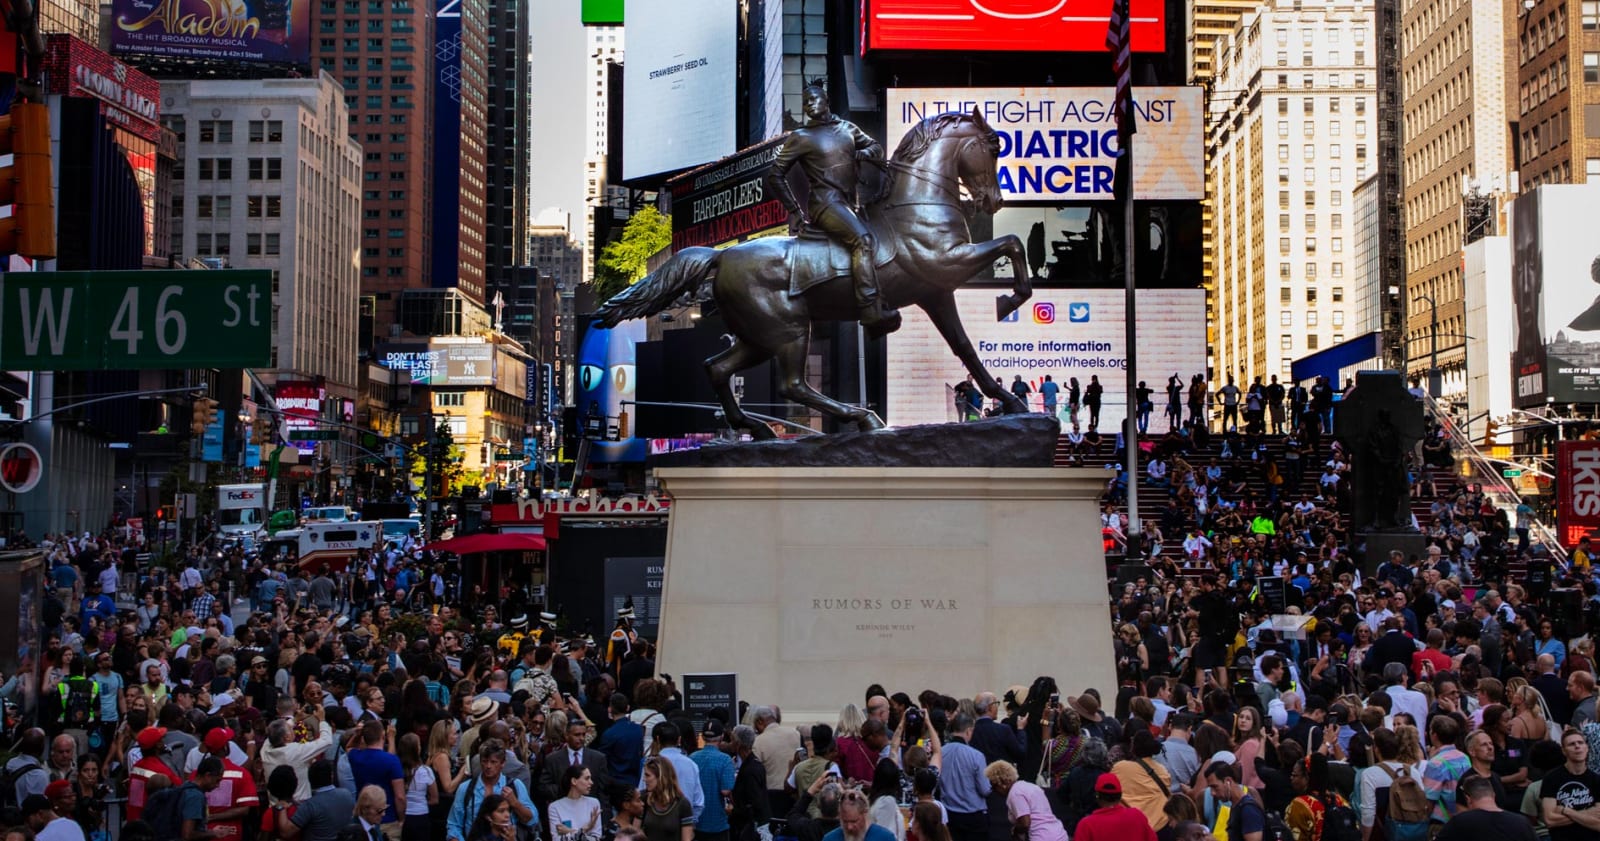 <p>Installation view: 'Rumors of War', Public Installation, Times Square, New York, NY (2019), now permanently in the Collection of the Virginia Museum of Fine Arts, Richmond, VA.</p>